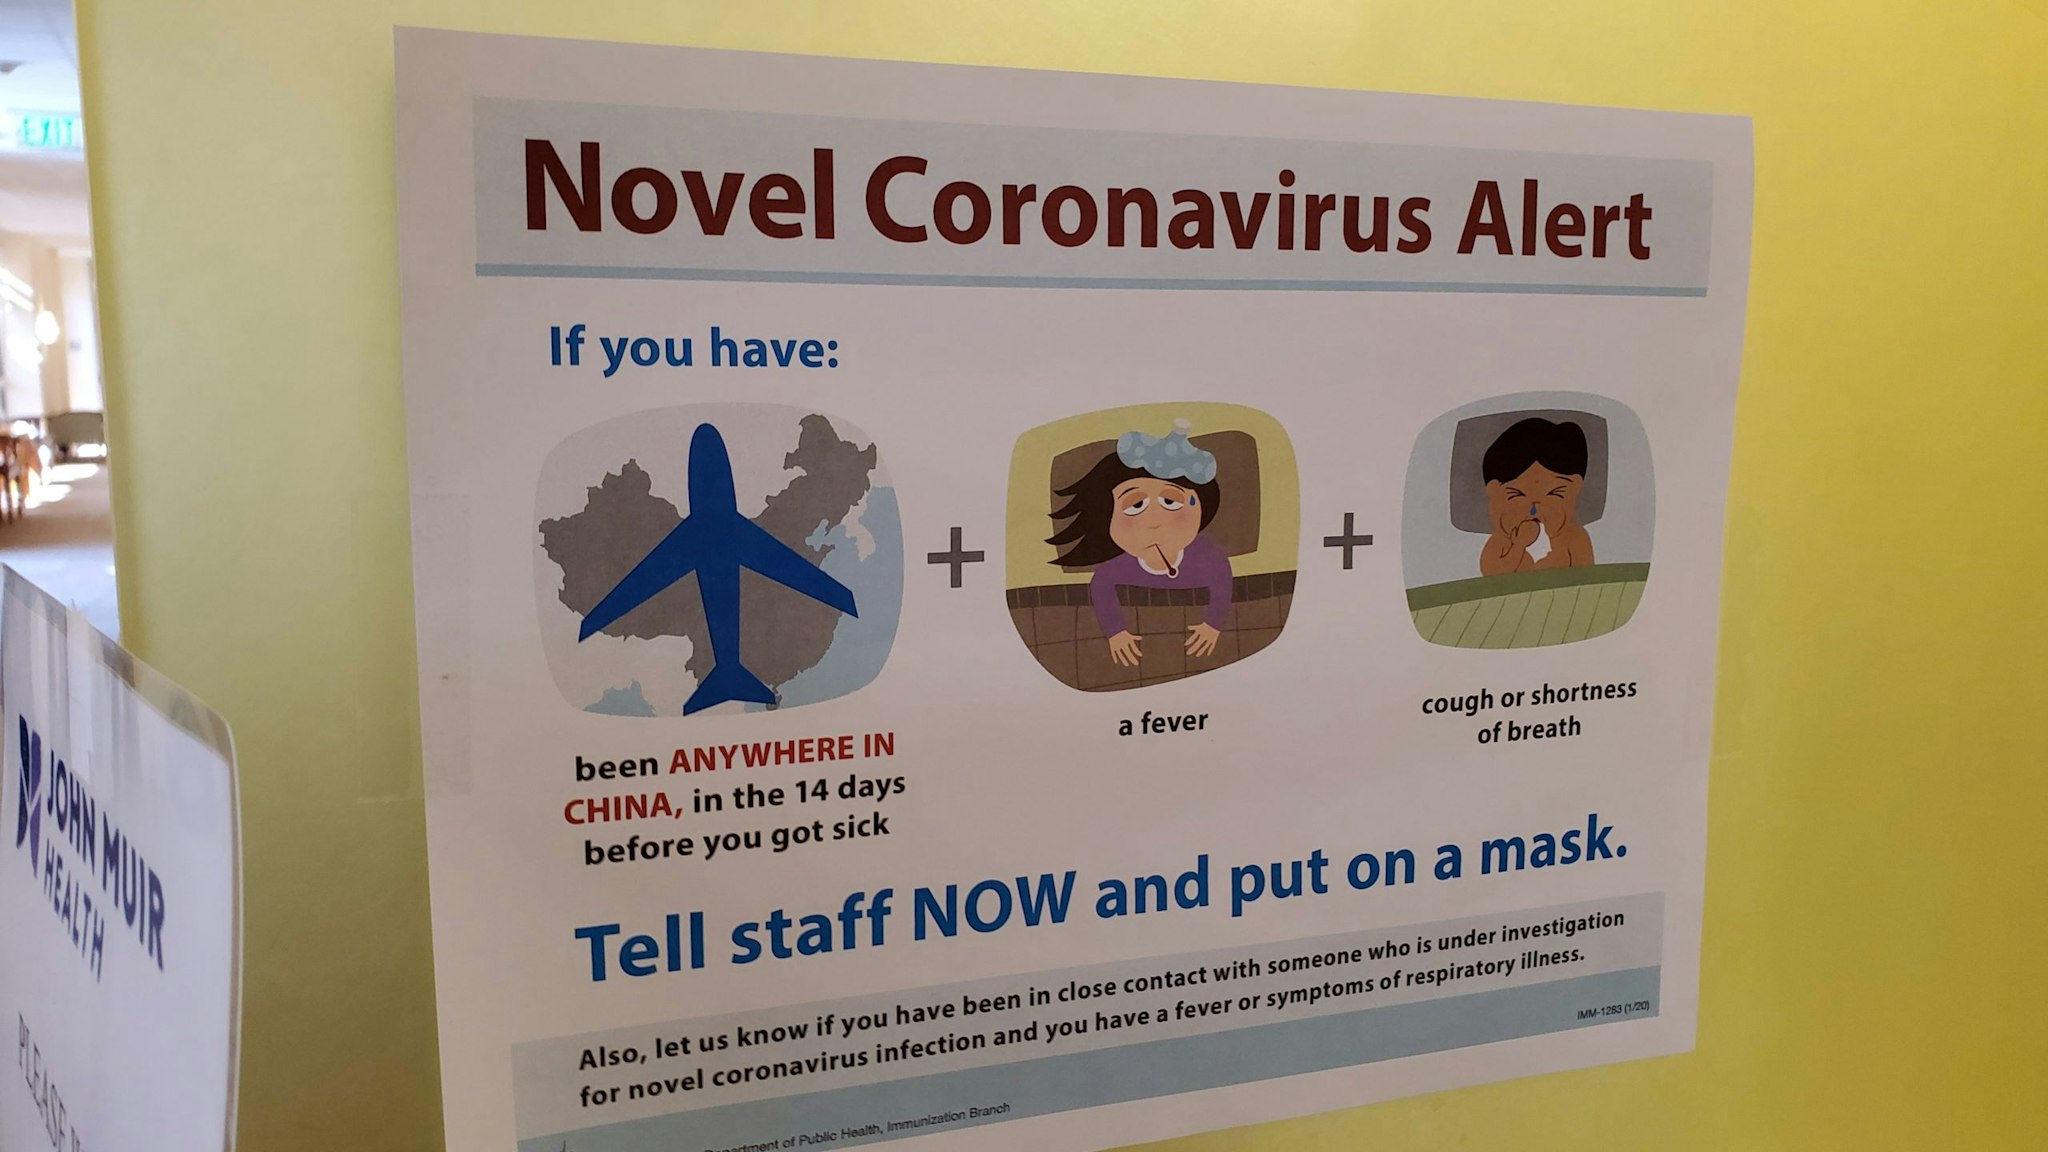 Warning sign with text reading "Novel Coronavirus Alert", referring to quarantine and screening procedures for patients with possible exposure to a novel coronavirus spreading in China, at a John Muir Health medical center in Walnut Creek, California, February 9, 2020. (Photo by Smith Collection/Gado/Getty Images)